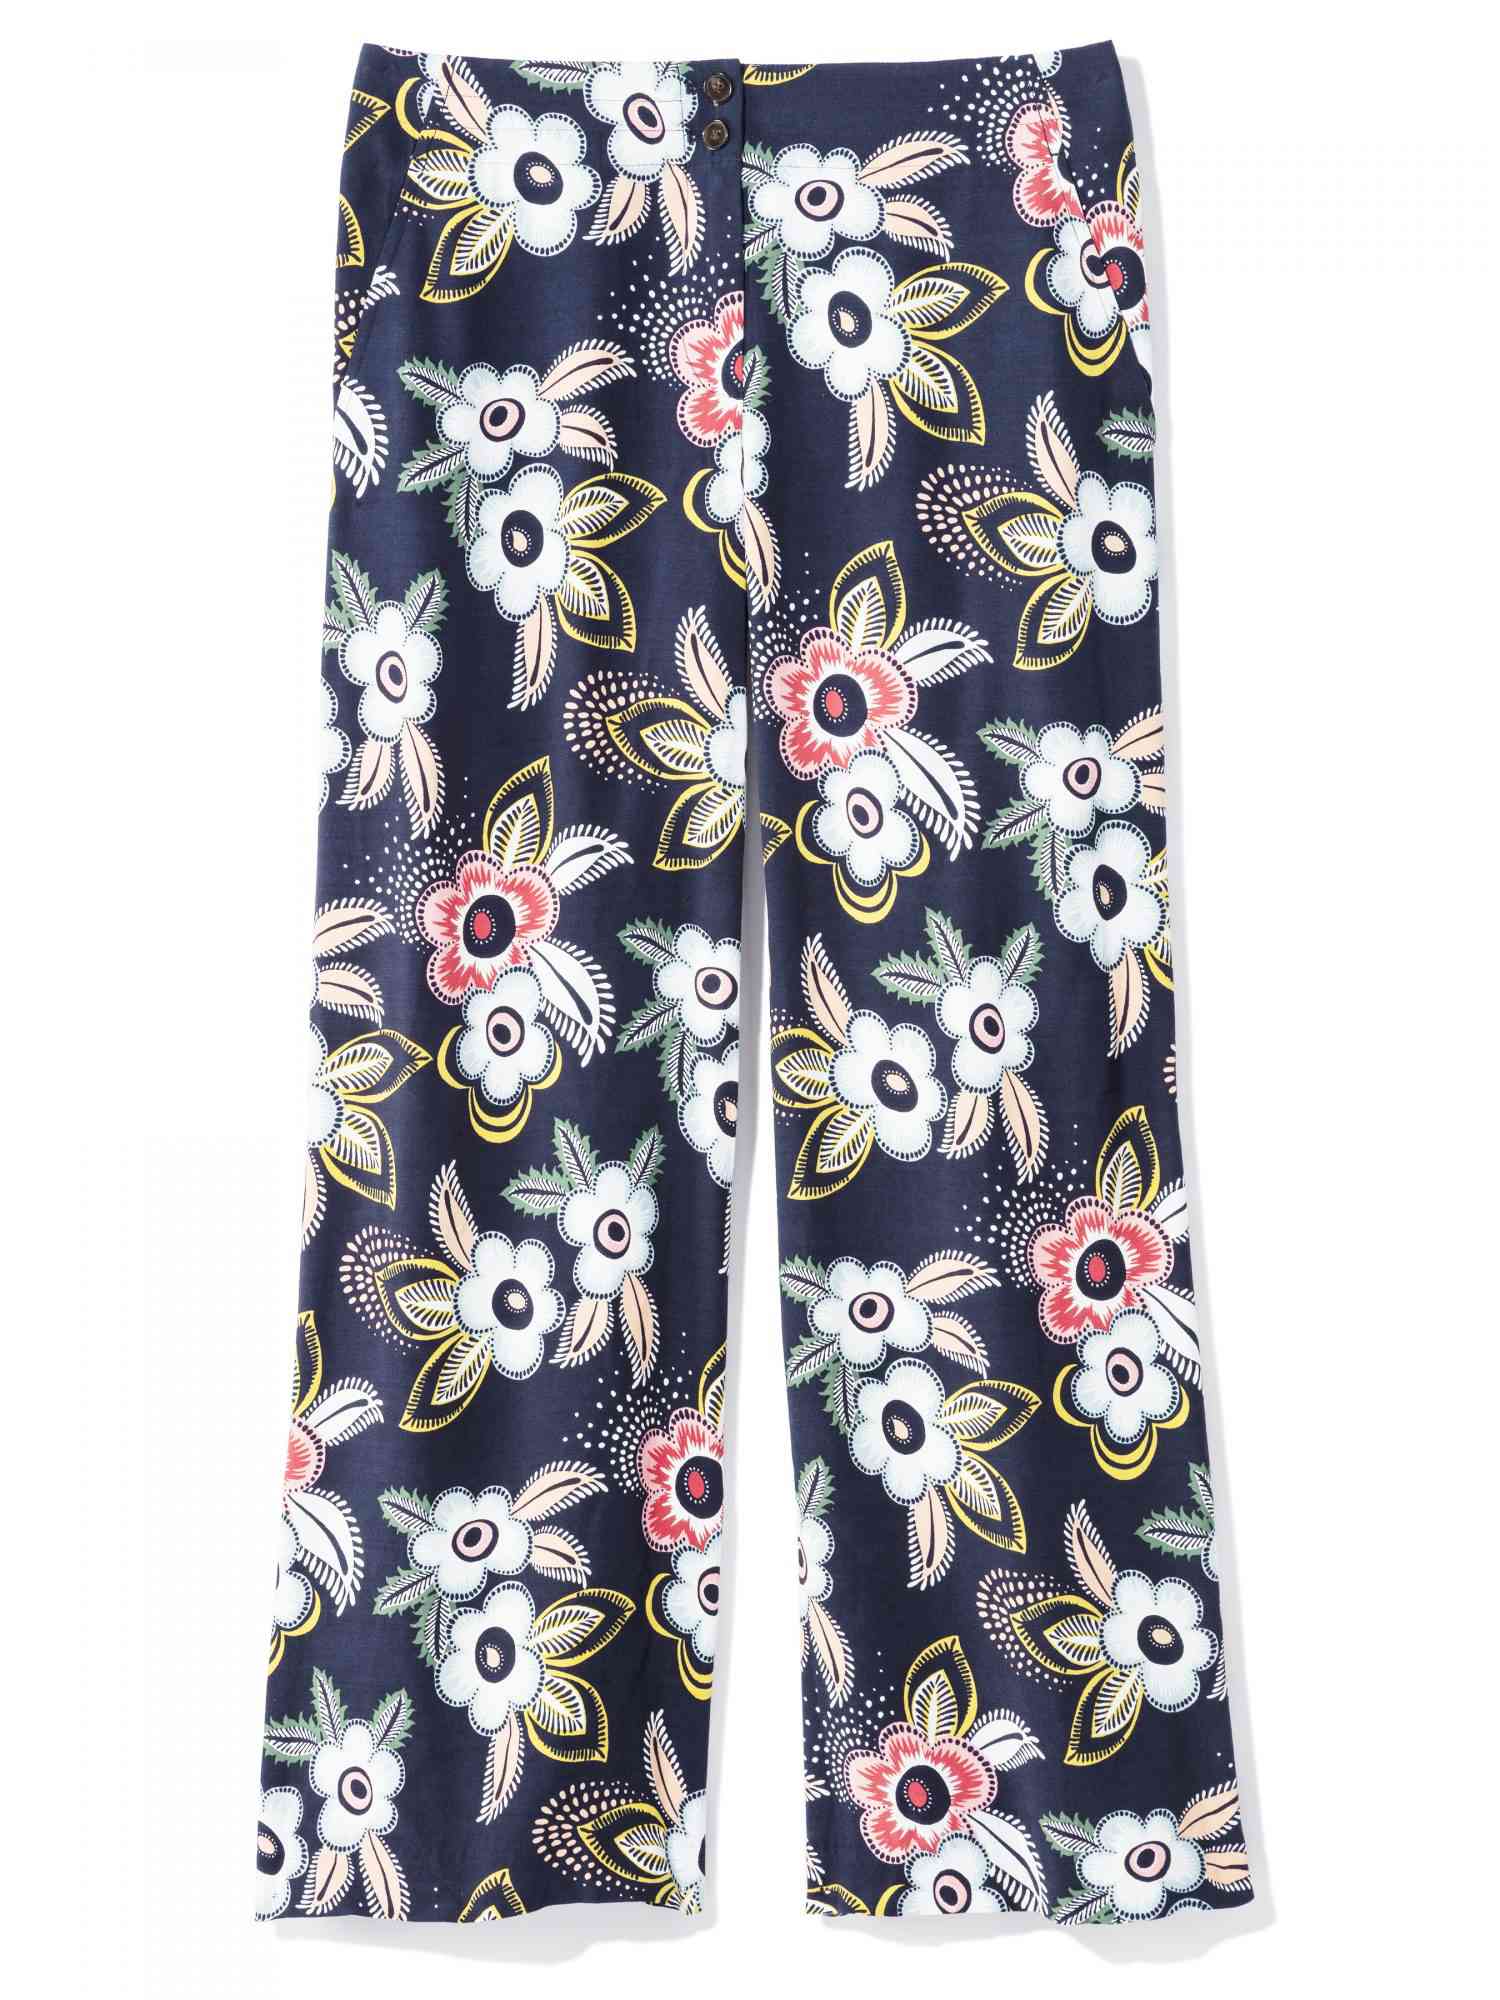 Floral Pants to Shop for Summer | PEOPLE.com